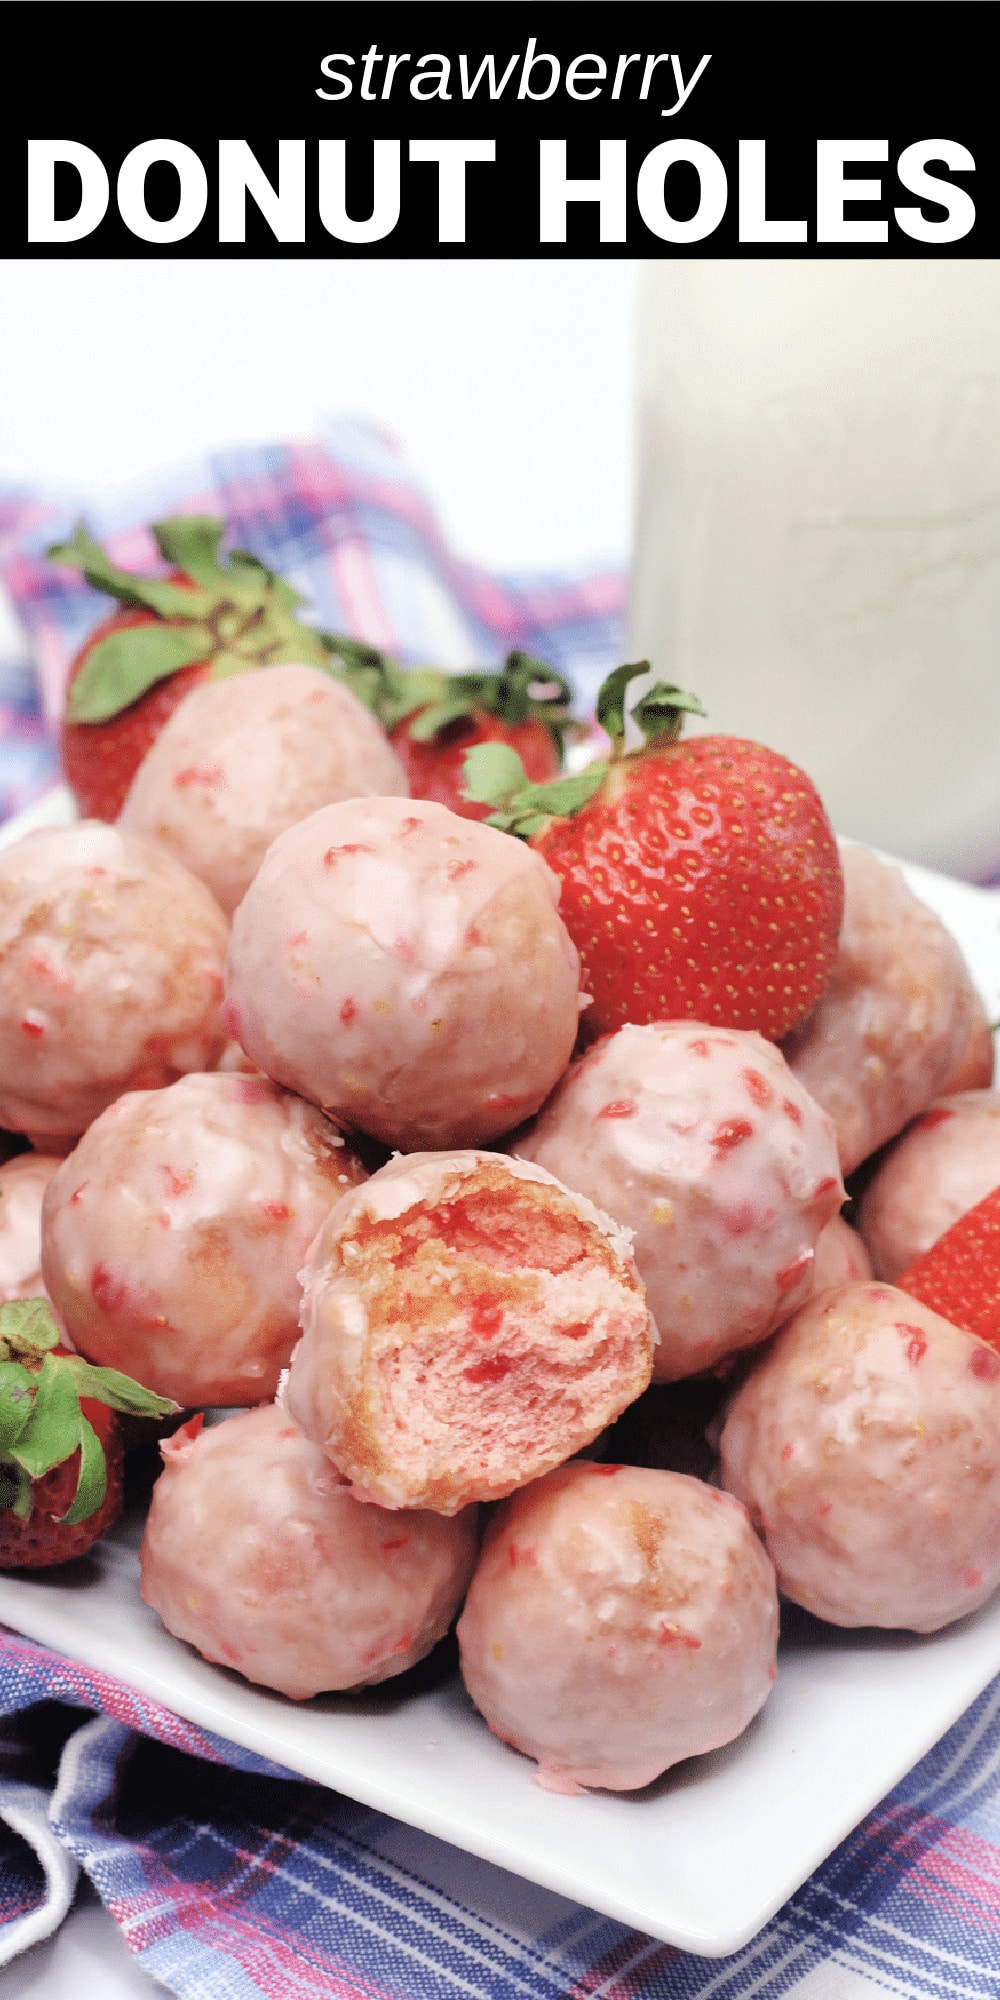 These strawberry donut holes are the perfect weekend breakfast that’s sure to get your family out of bed. Moist and delicious cake donuts are baked to a perfect golden brown and covered in a fresh strawberry glaze. These tasty bites are incredibly easy to make and bursting with real strawberry flavor. 